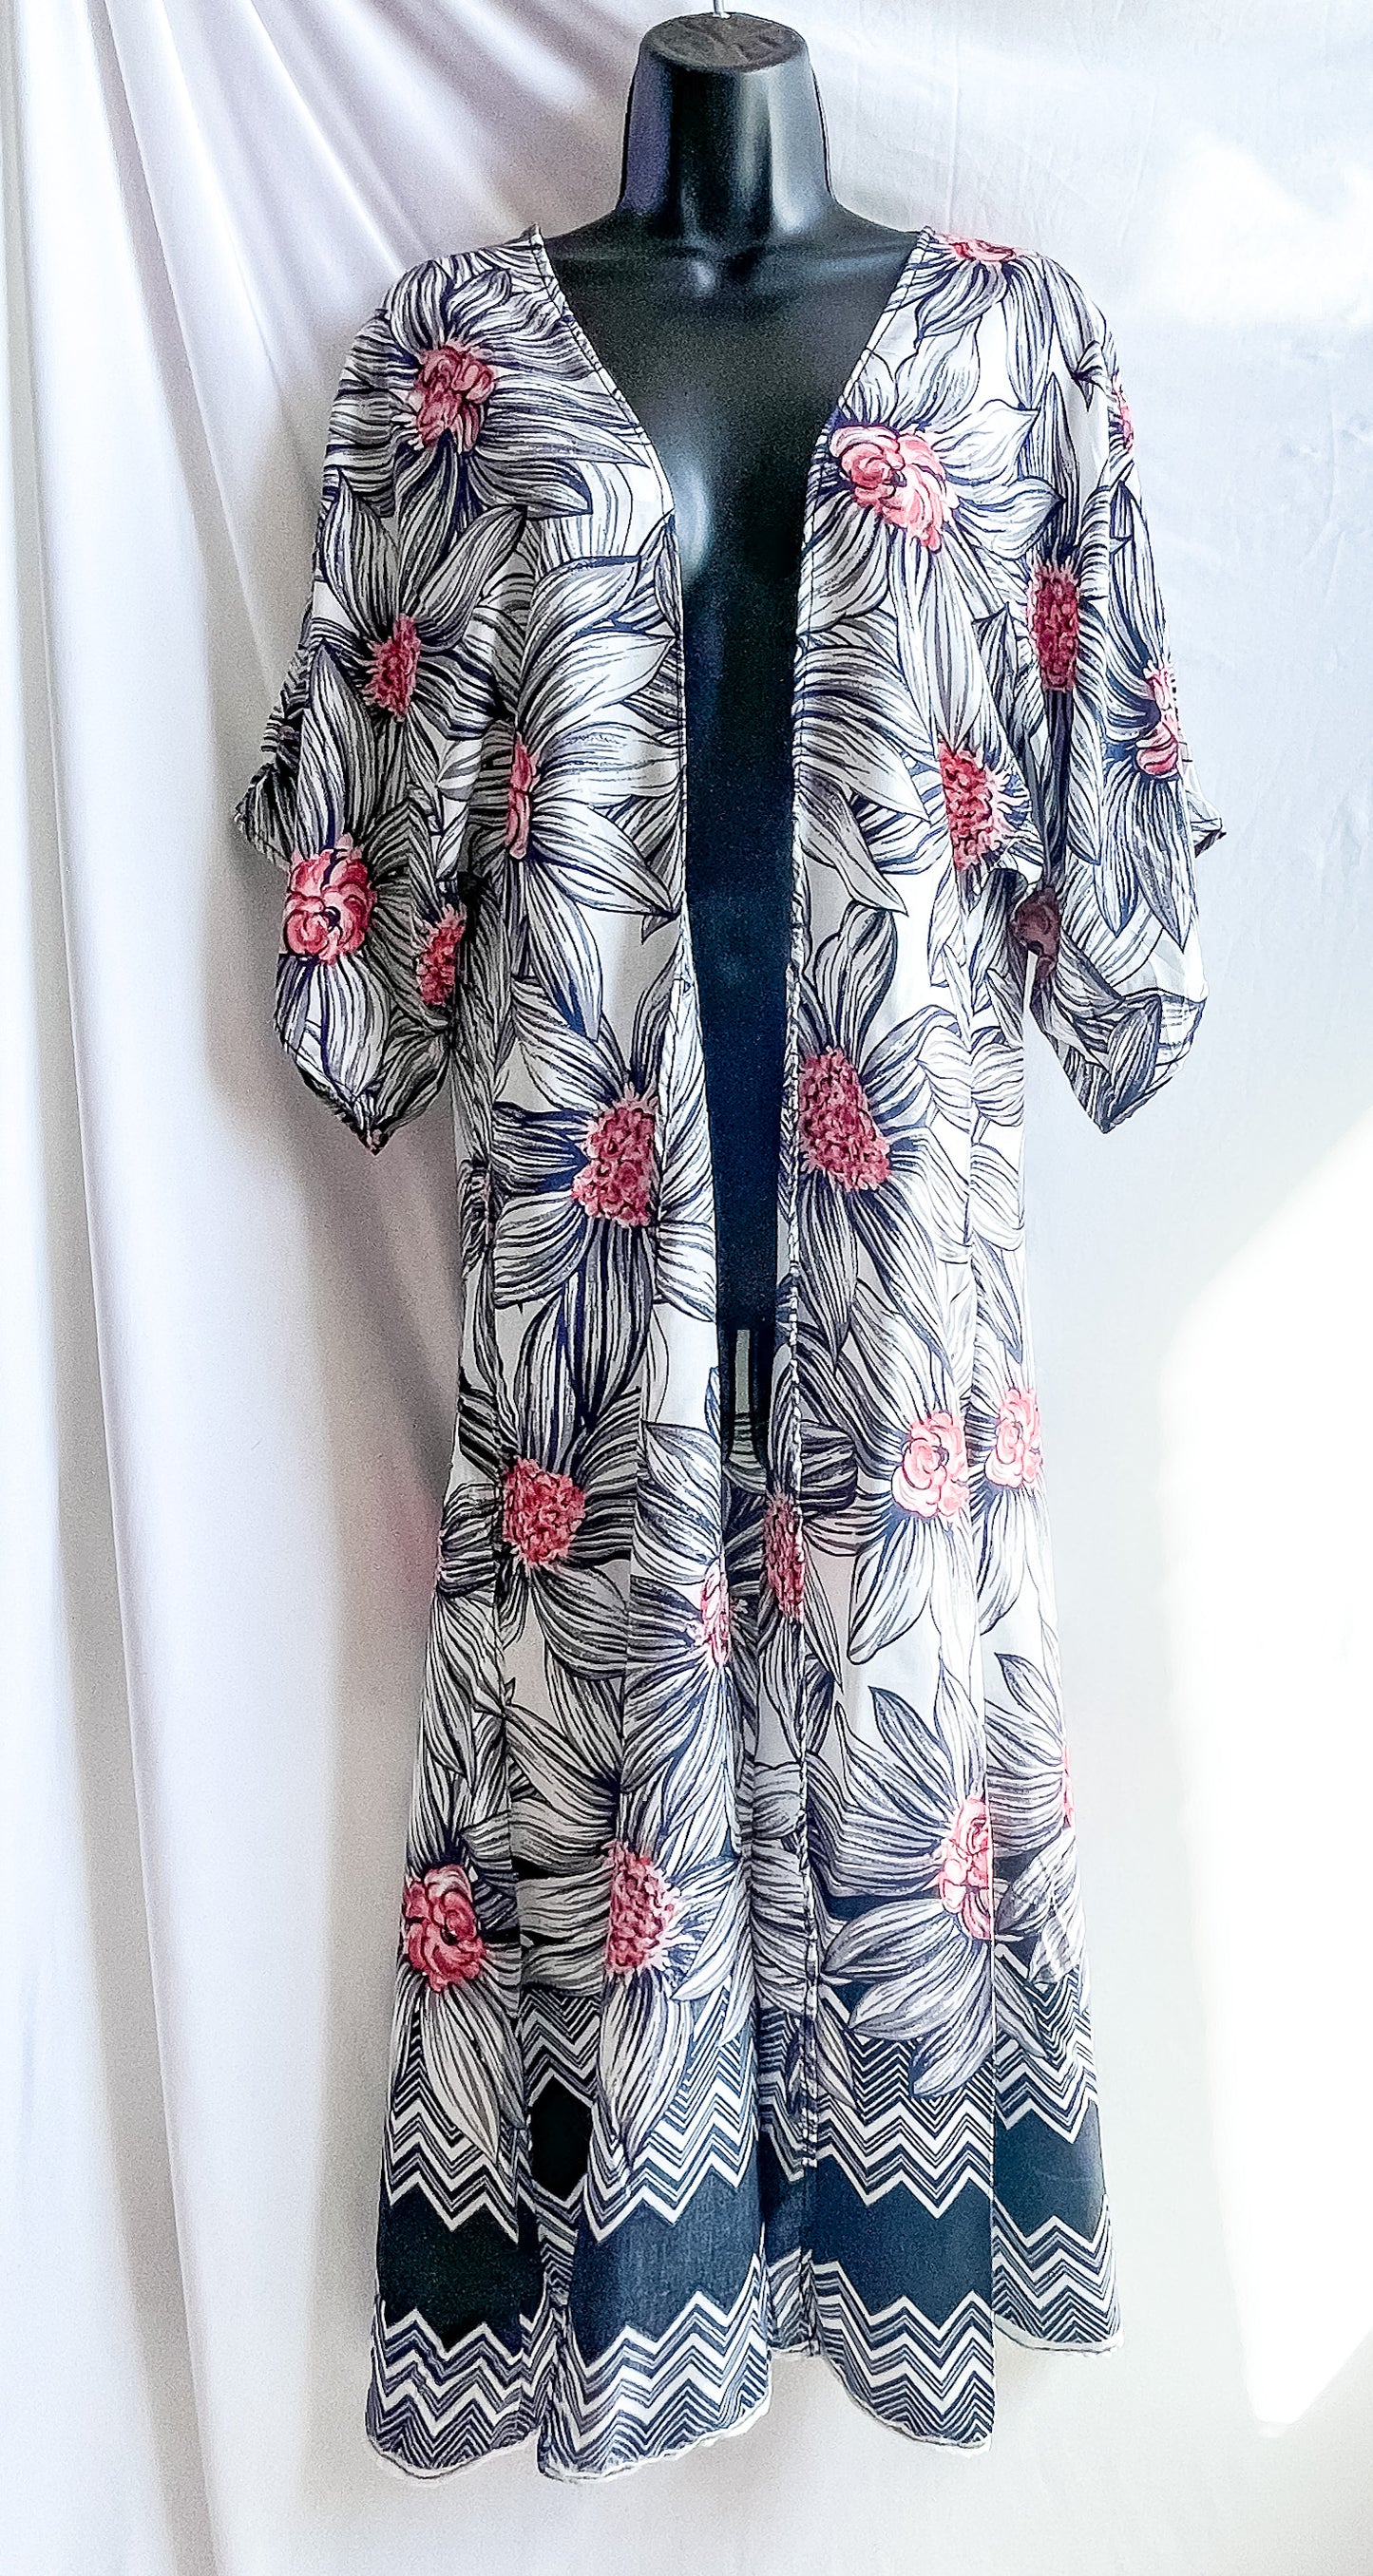 robe, robe style, summer fashion, summer look, floral, handmade, boho, cover up